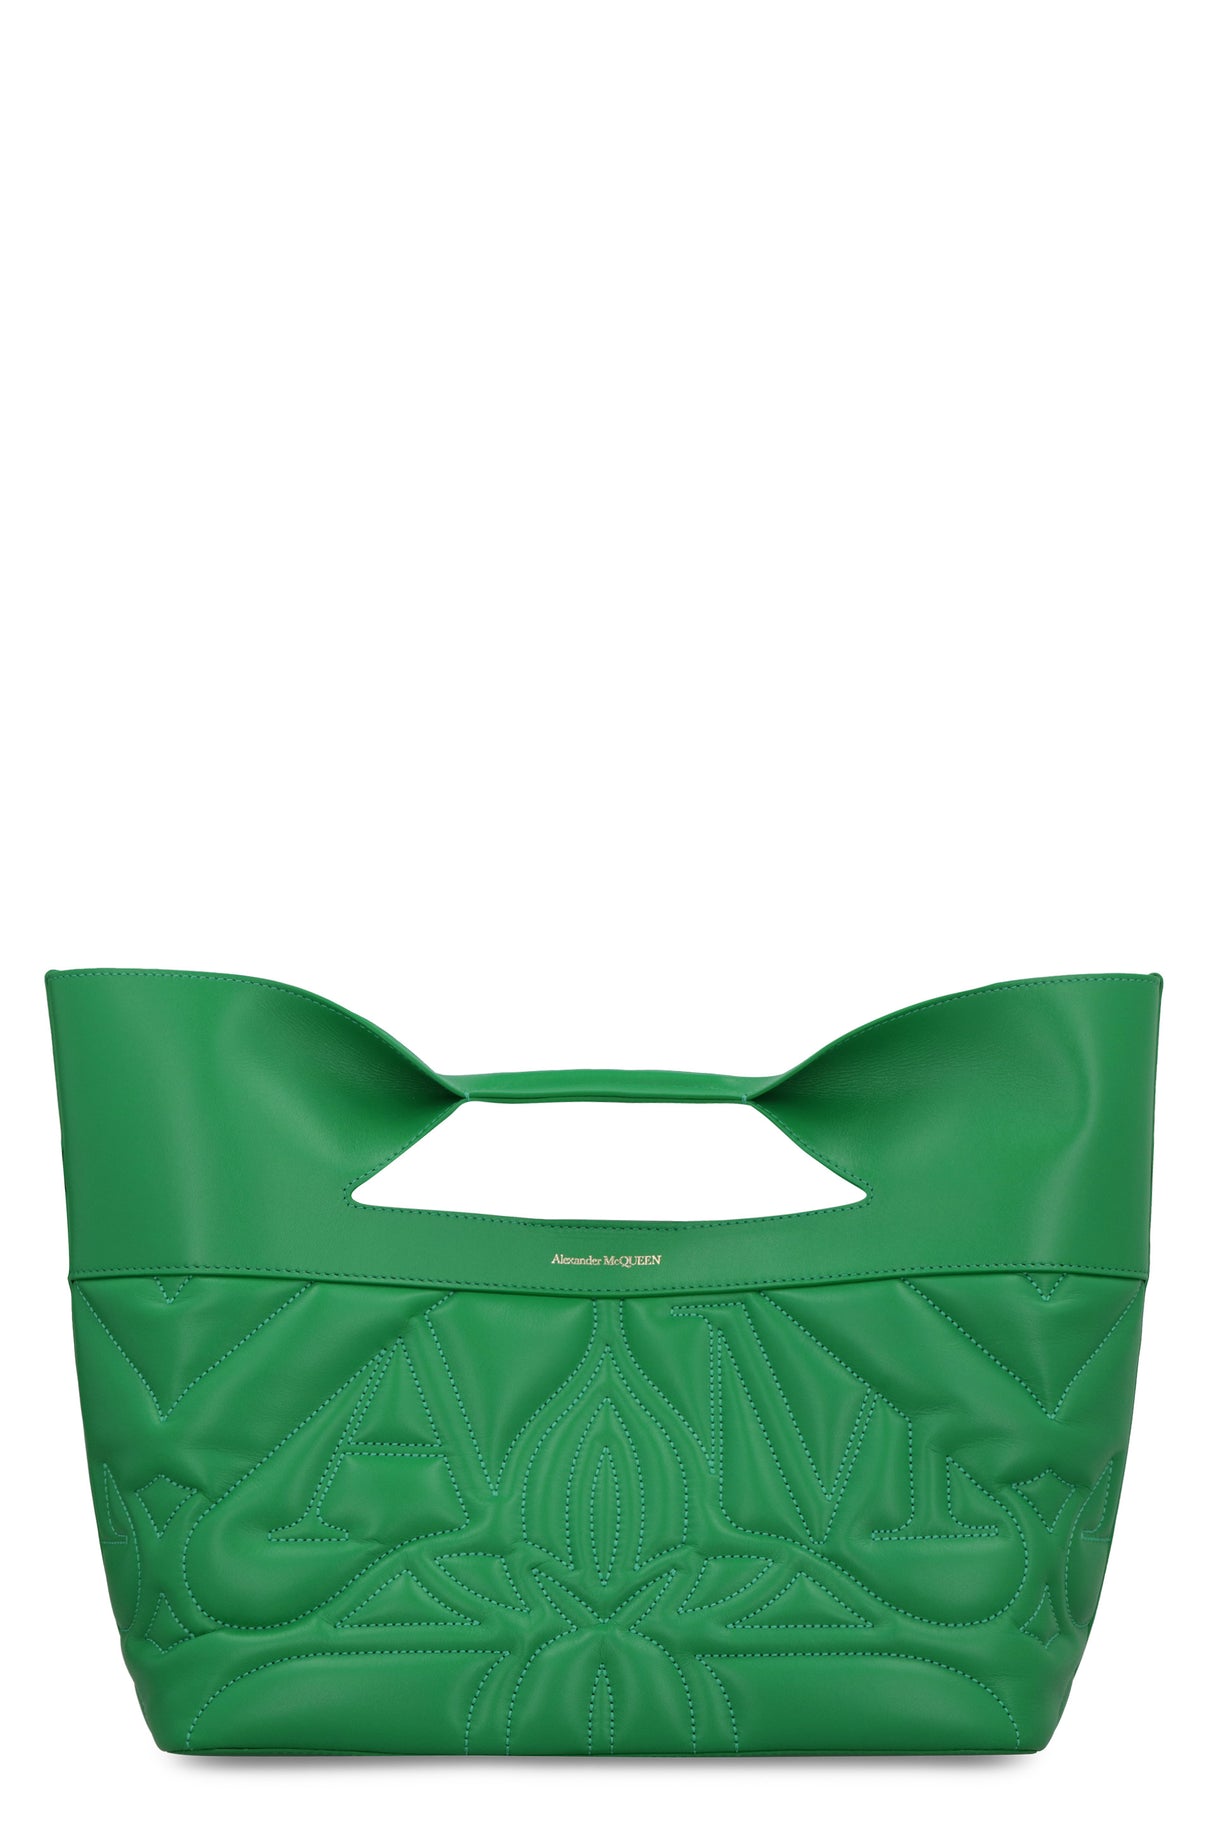 ALEXANDER MCQUEEN Chic Quilted Leather Mini Bow Handbag with Gold-Tone Accents - Green